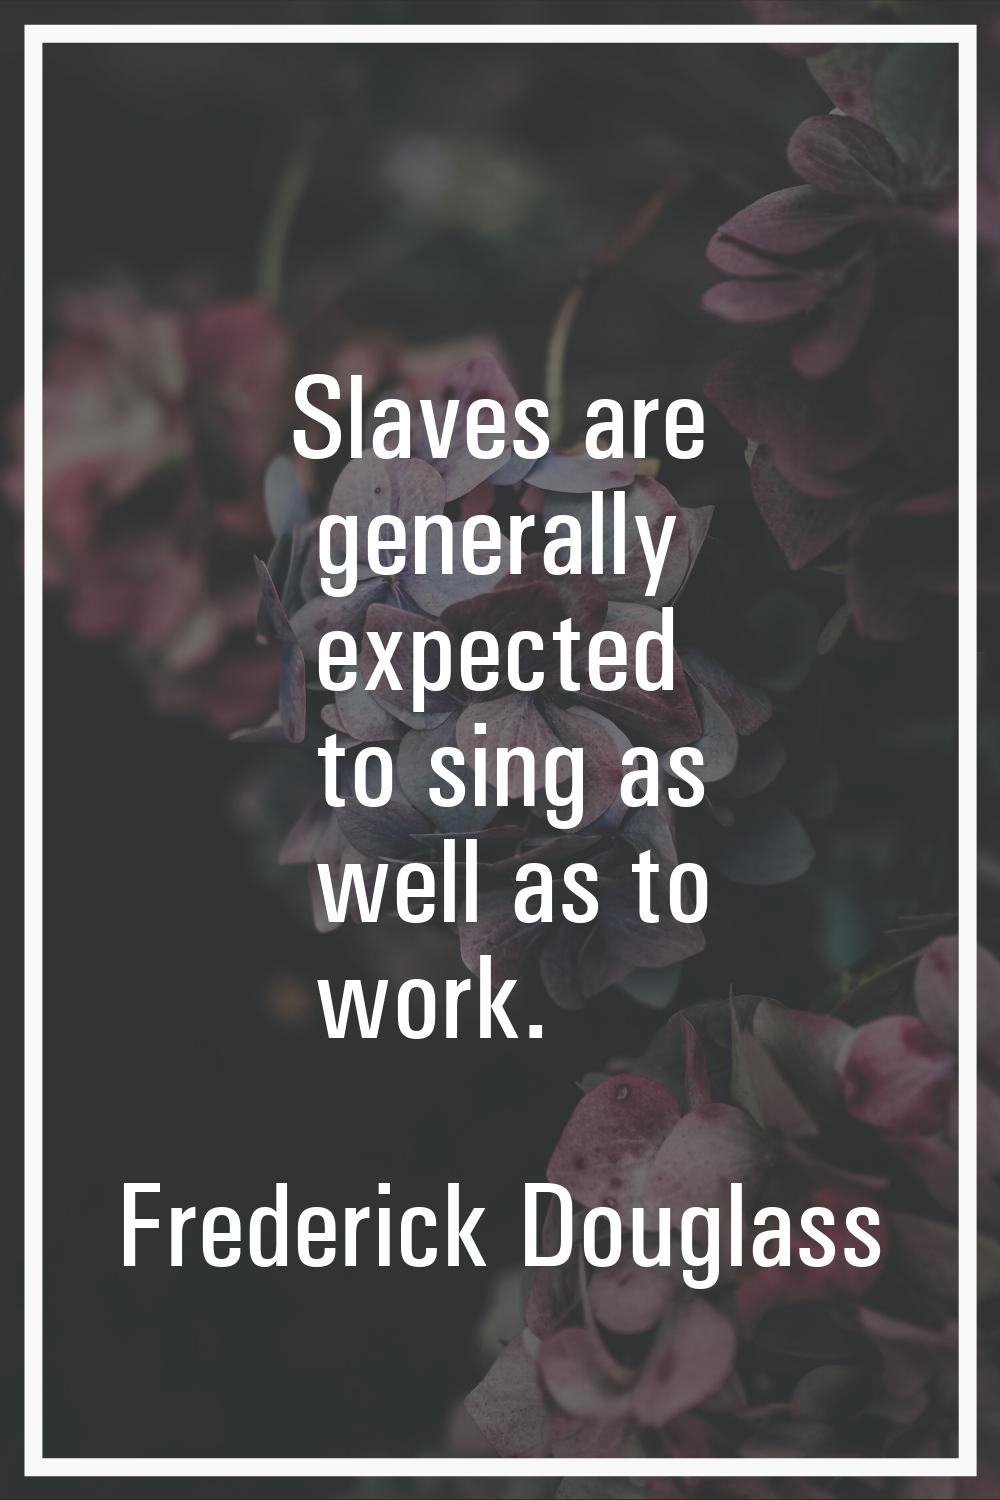 Slaves are generally expected to sing as well as to work.